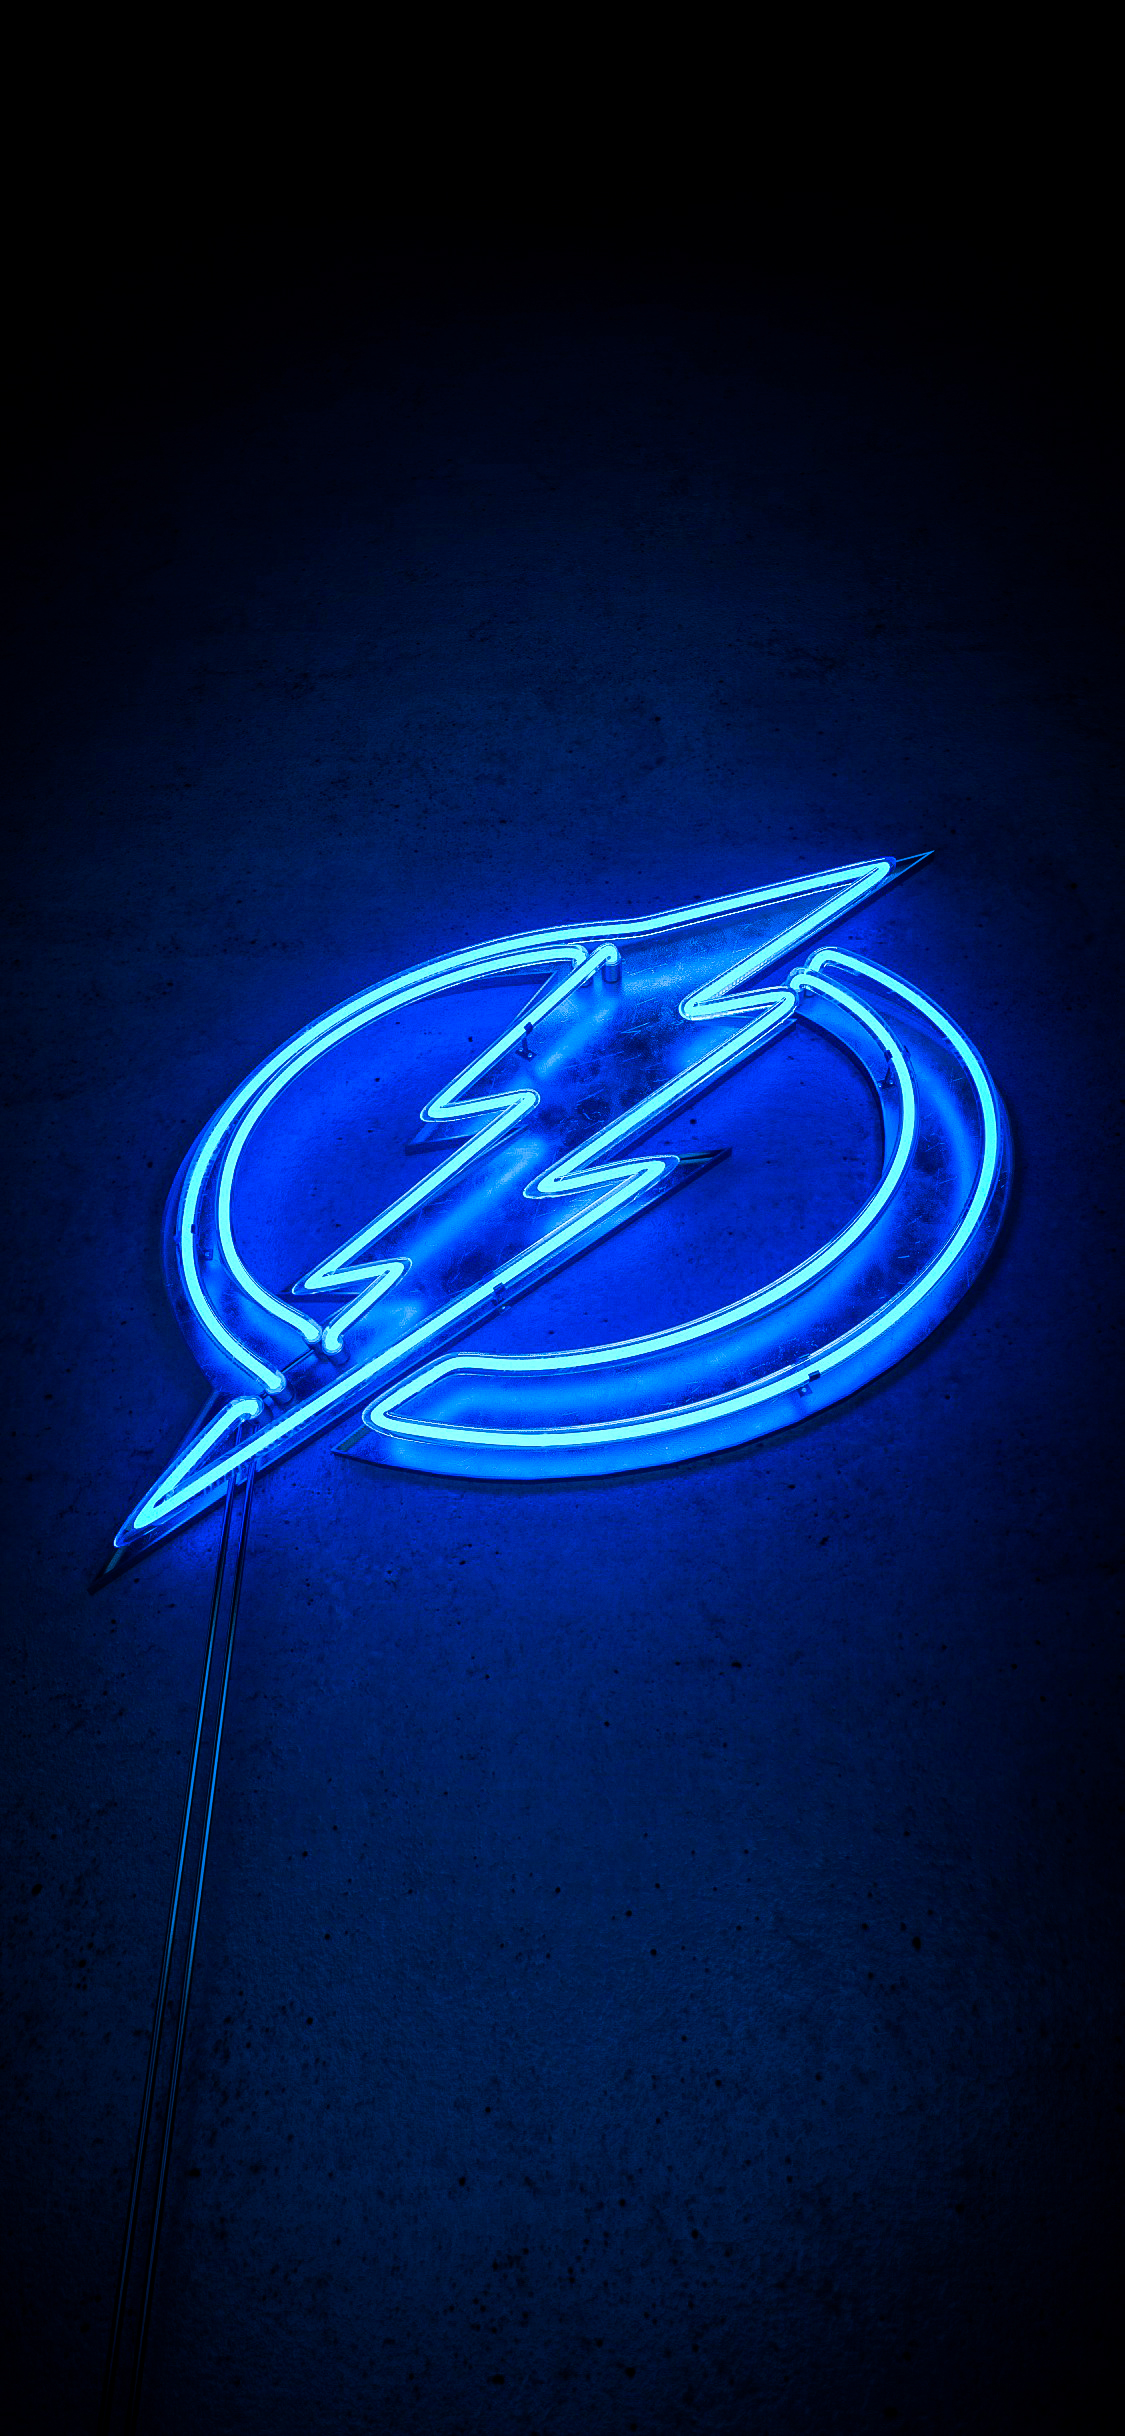 Tampa Bay Lightning trying something a little different for wallpaper! The idea here is the first one